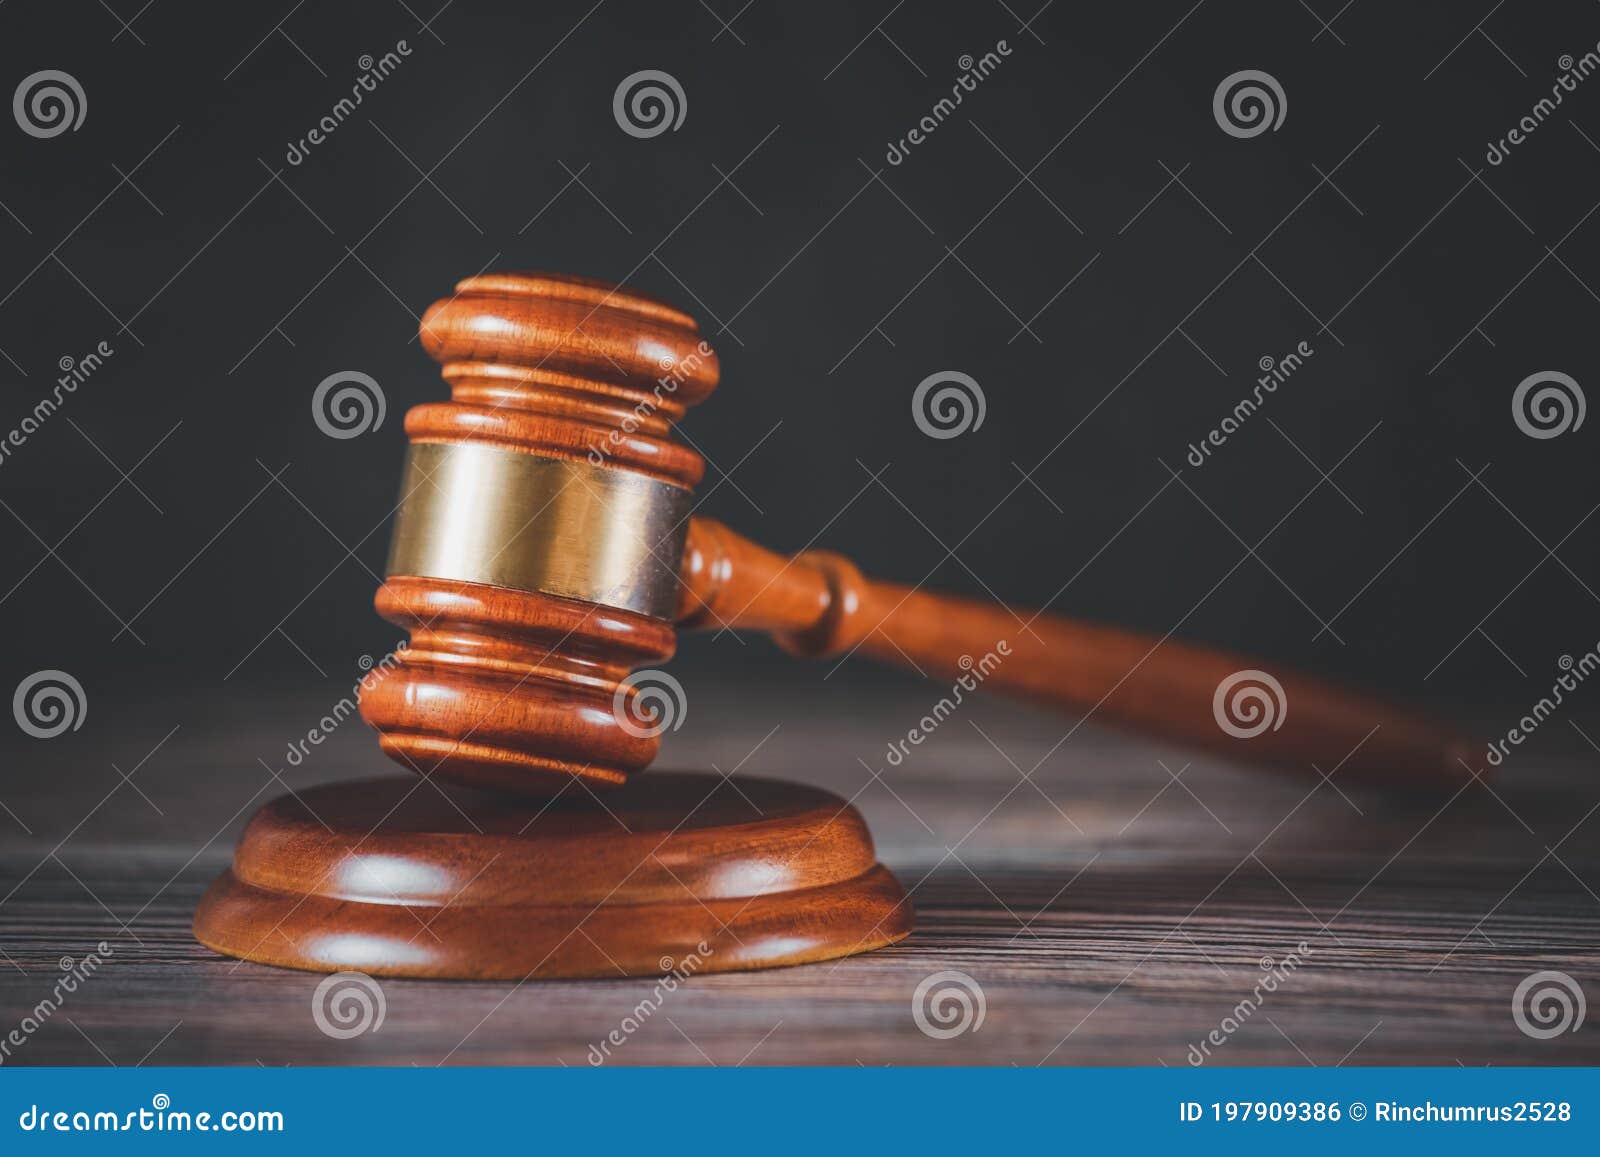 old wood judge hammer with law book on the table wood background, used for adjudication and justice